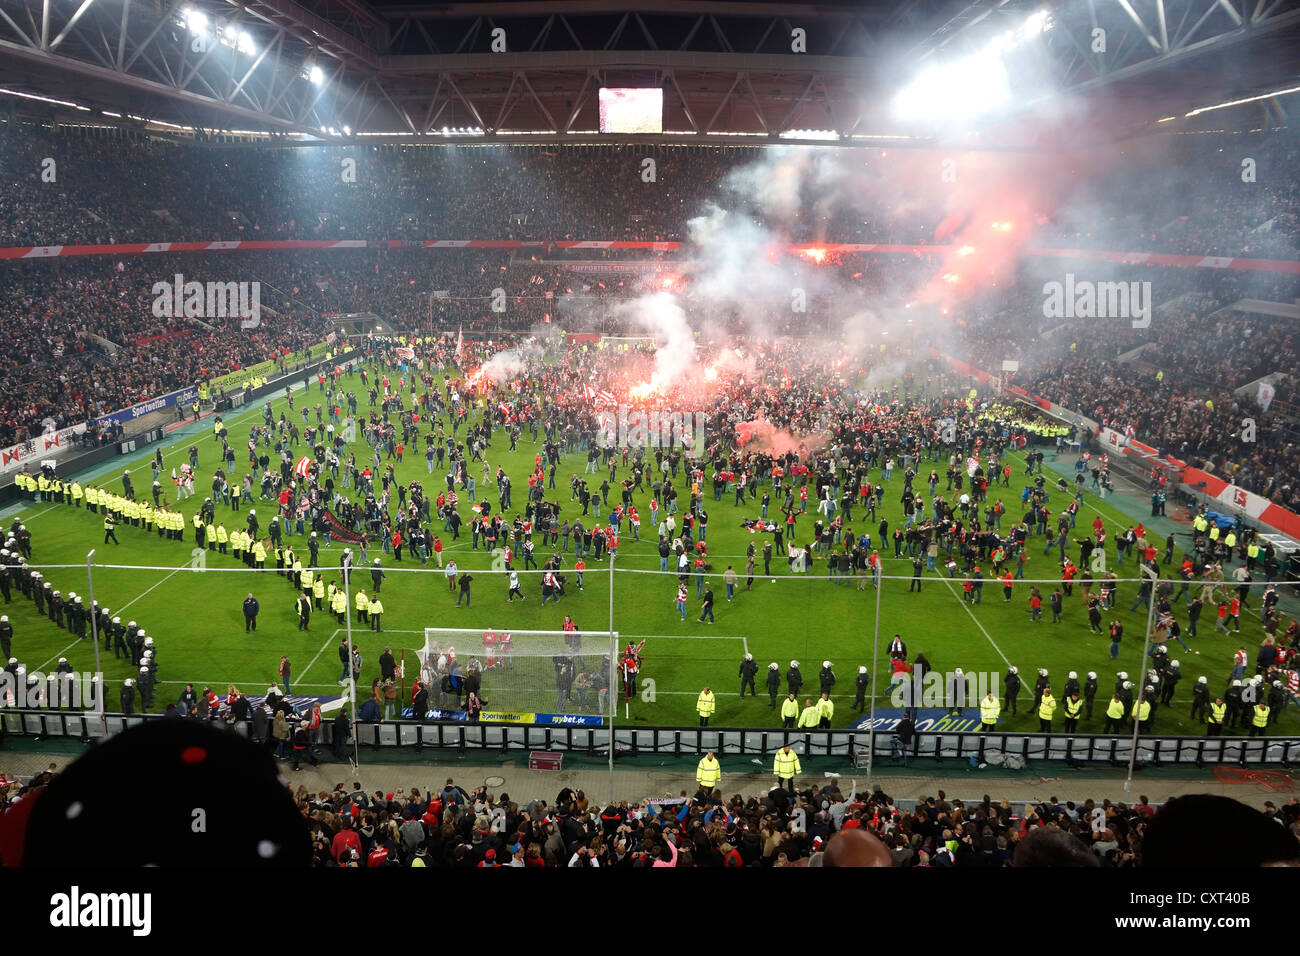 Fans during a pitch invasion, rioting on the pitch, during the relegation match Fortuna Duesseldorf vs. Herta BSC Berlin Stock Photo